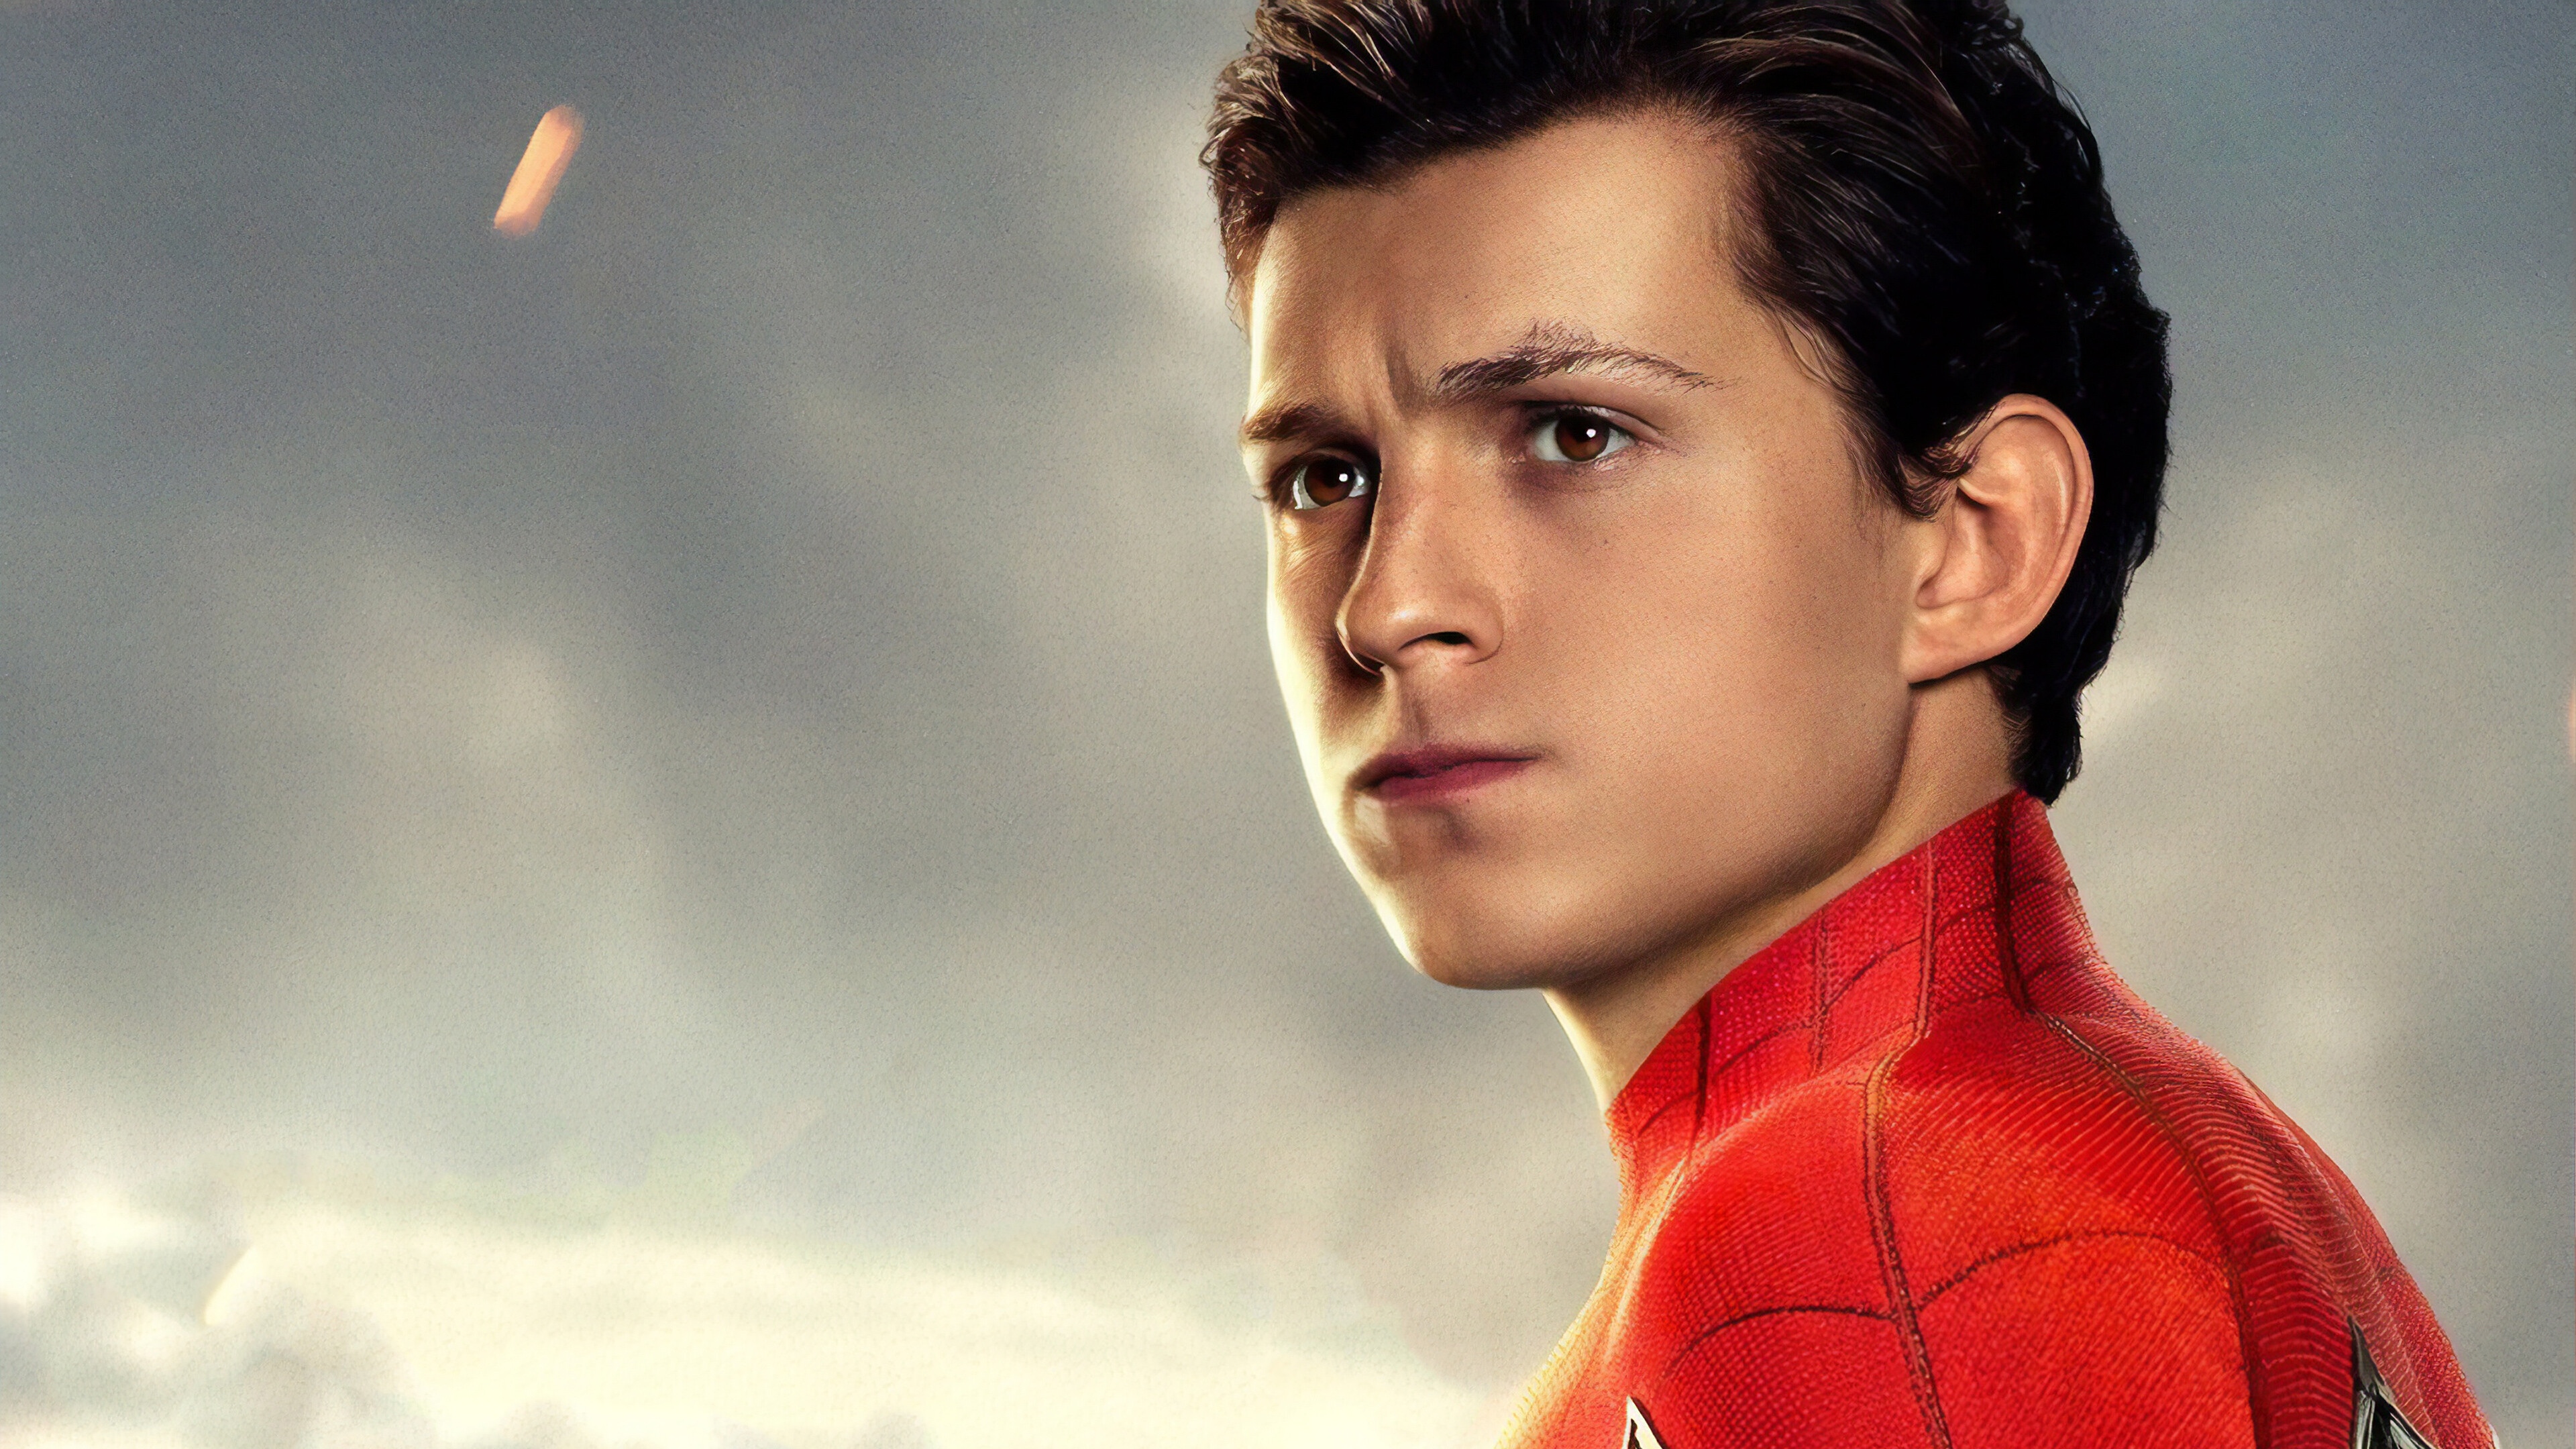 Tom Holland: Made his film debut in the disaster drama The Impossible (2012) as Lucas, Spider-Man. 3840x2160 4K Background.